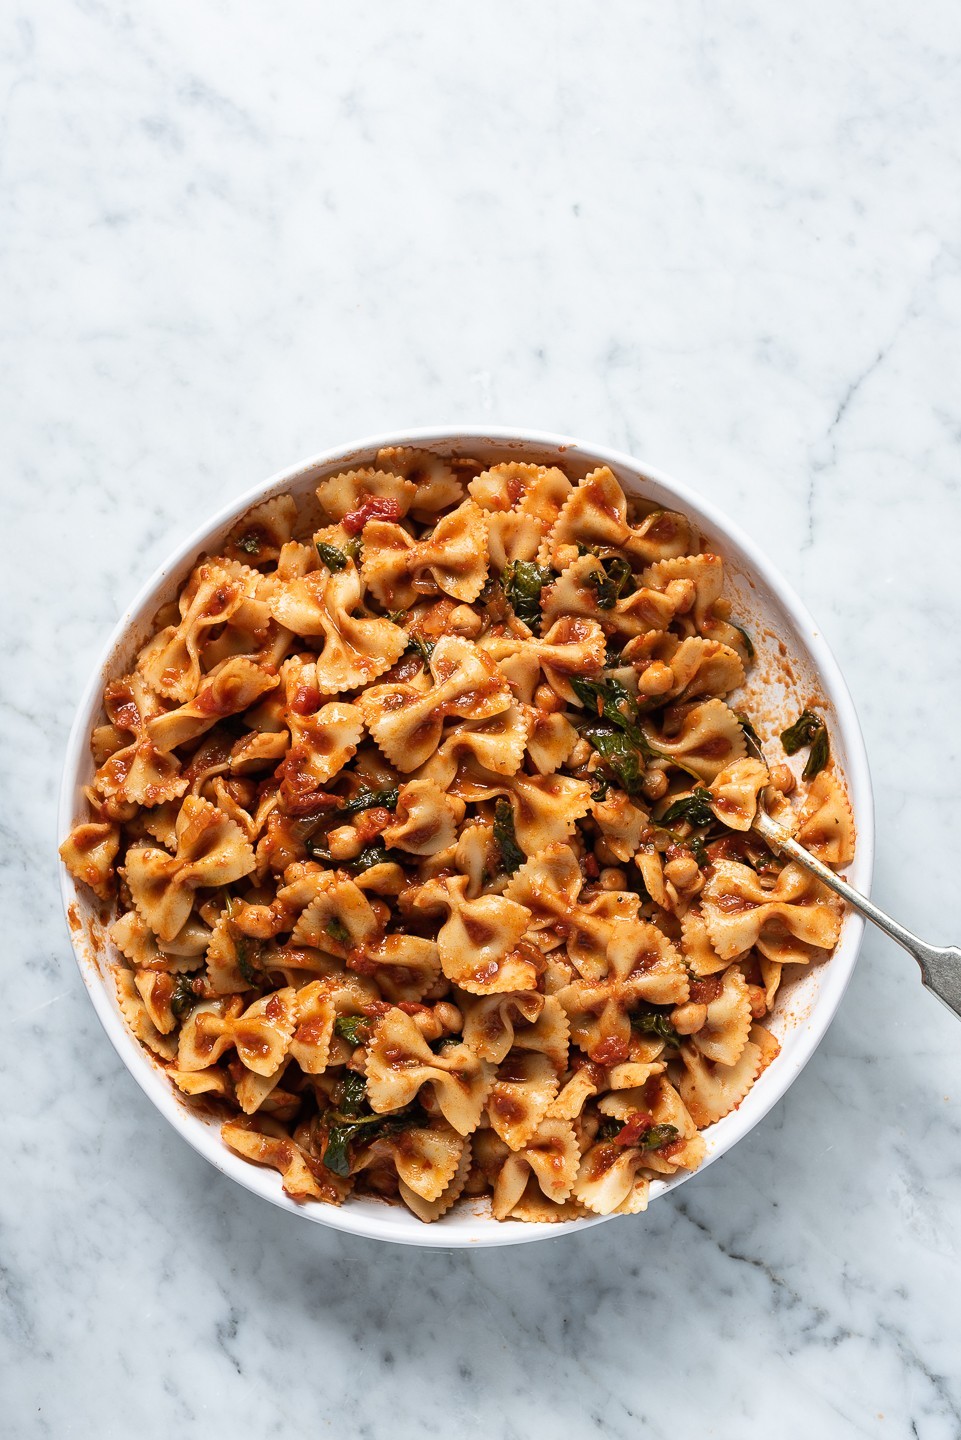 Bowtie spinach and chickpea pasta